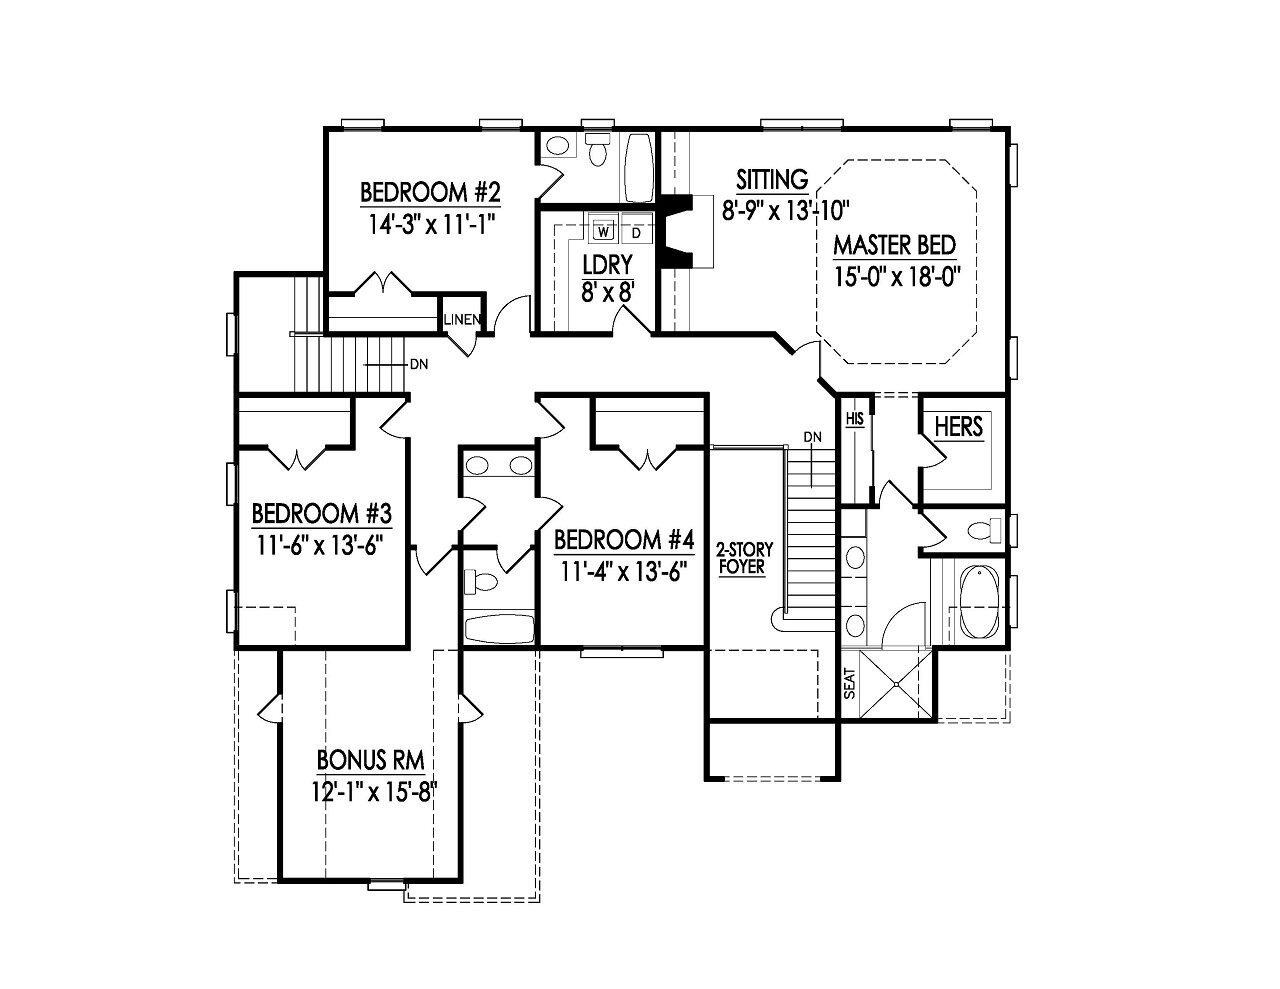 Secondary Image - Traditional House Plan - 32371 - 2nd Floor Plan